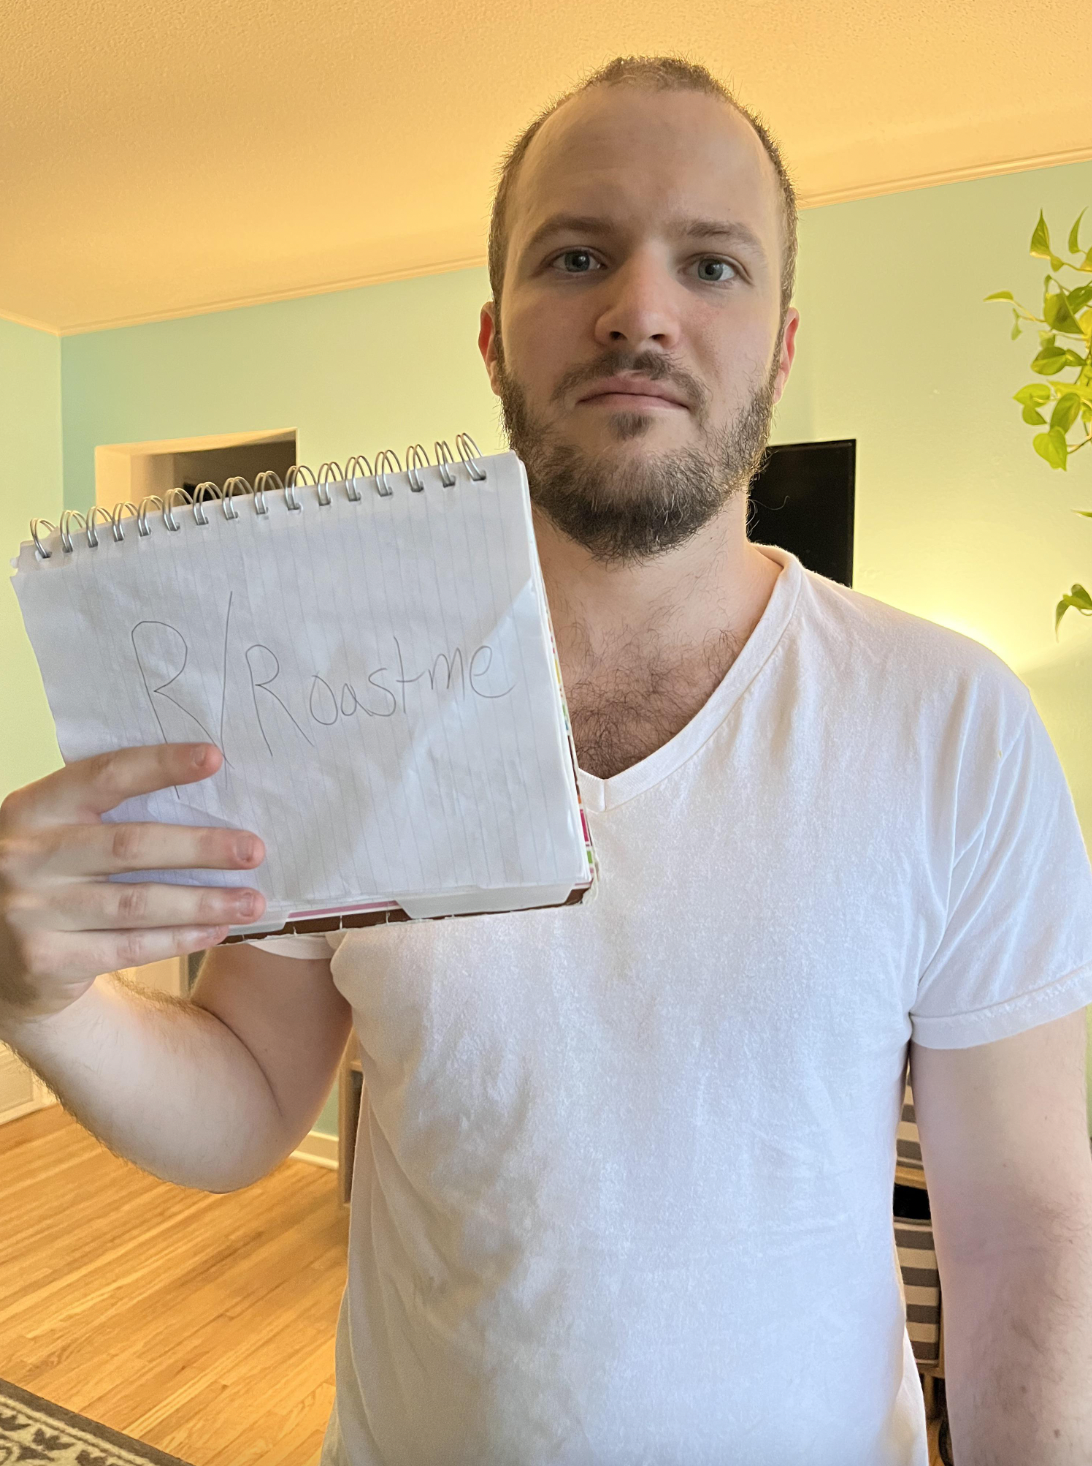 Lost a bet with my wife. Have at it, Reddit.